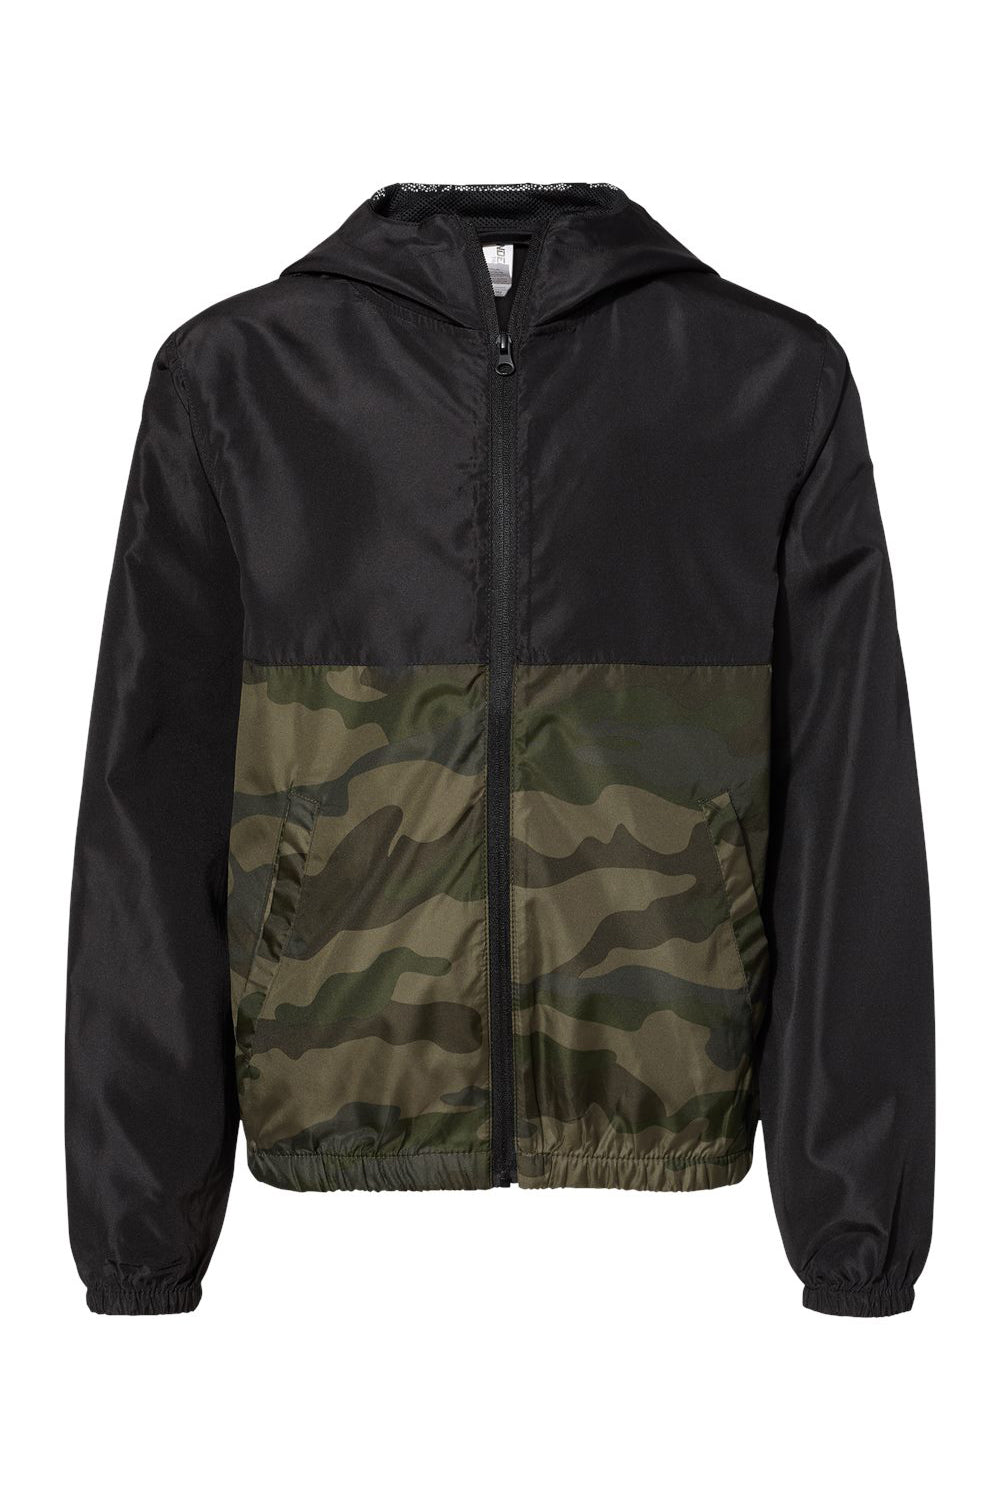 Independent Trading Co. EXP24YWZ Youth Full Zip Windbreaker Hooded Jacket Black/Forest Green Camo Flat Front